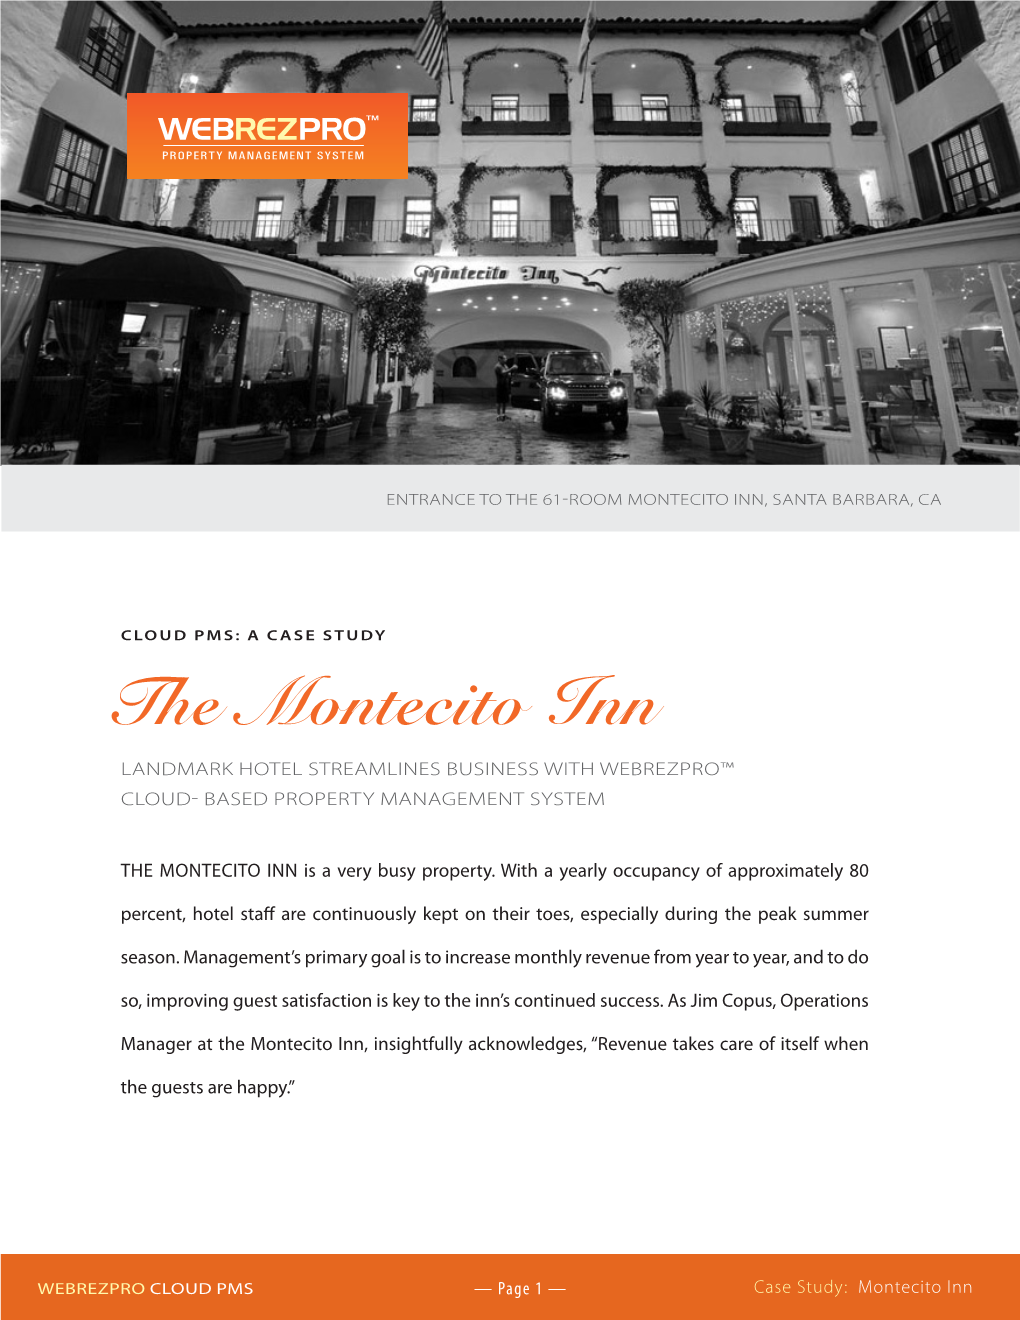 The Montecito Inn LANDMARK HOTEL STREAMLINES BUSINESS with WEBREZPRO™ CLOUD- BASED PROPERTY MANAGEMENT SYSTEM